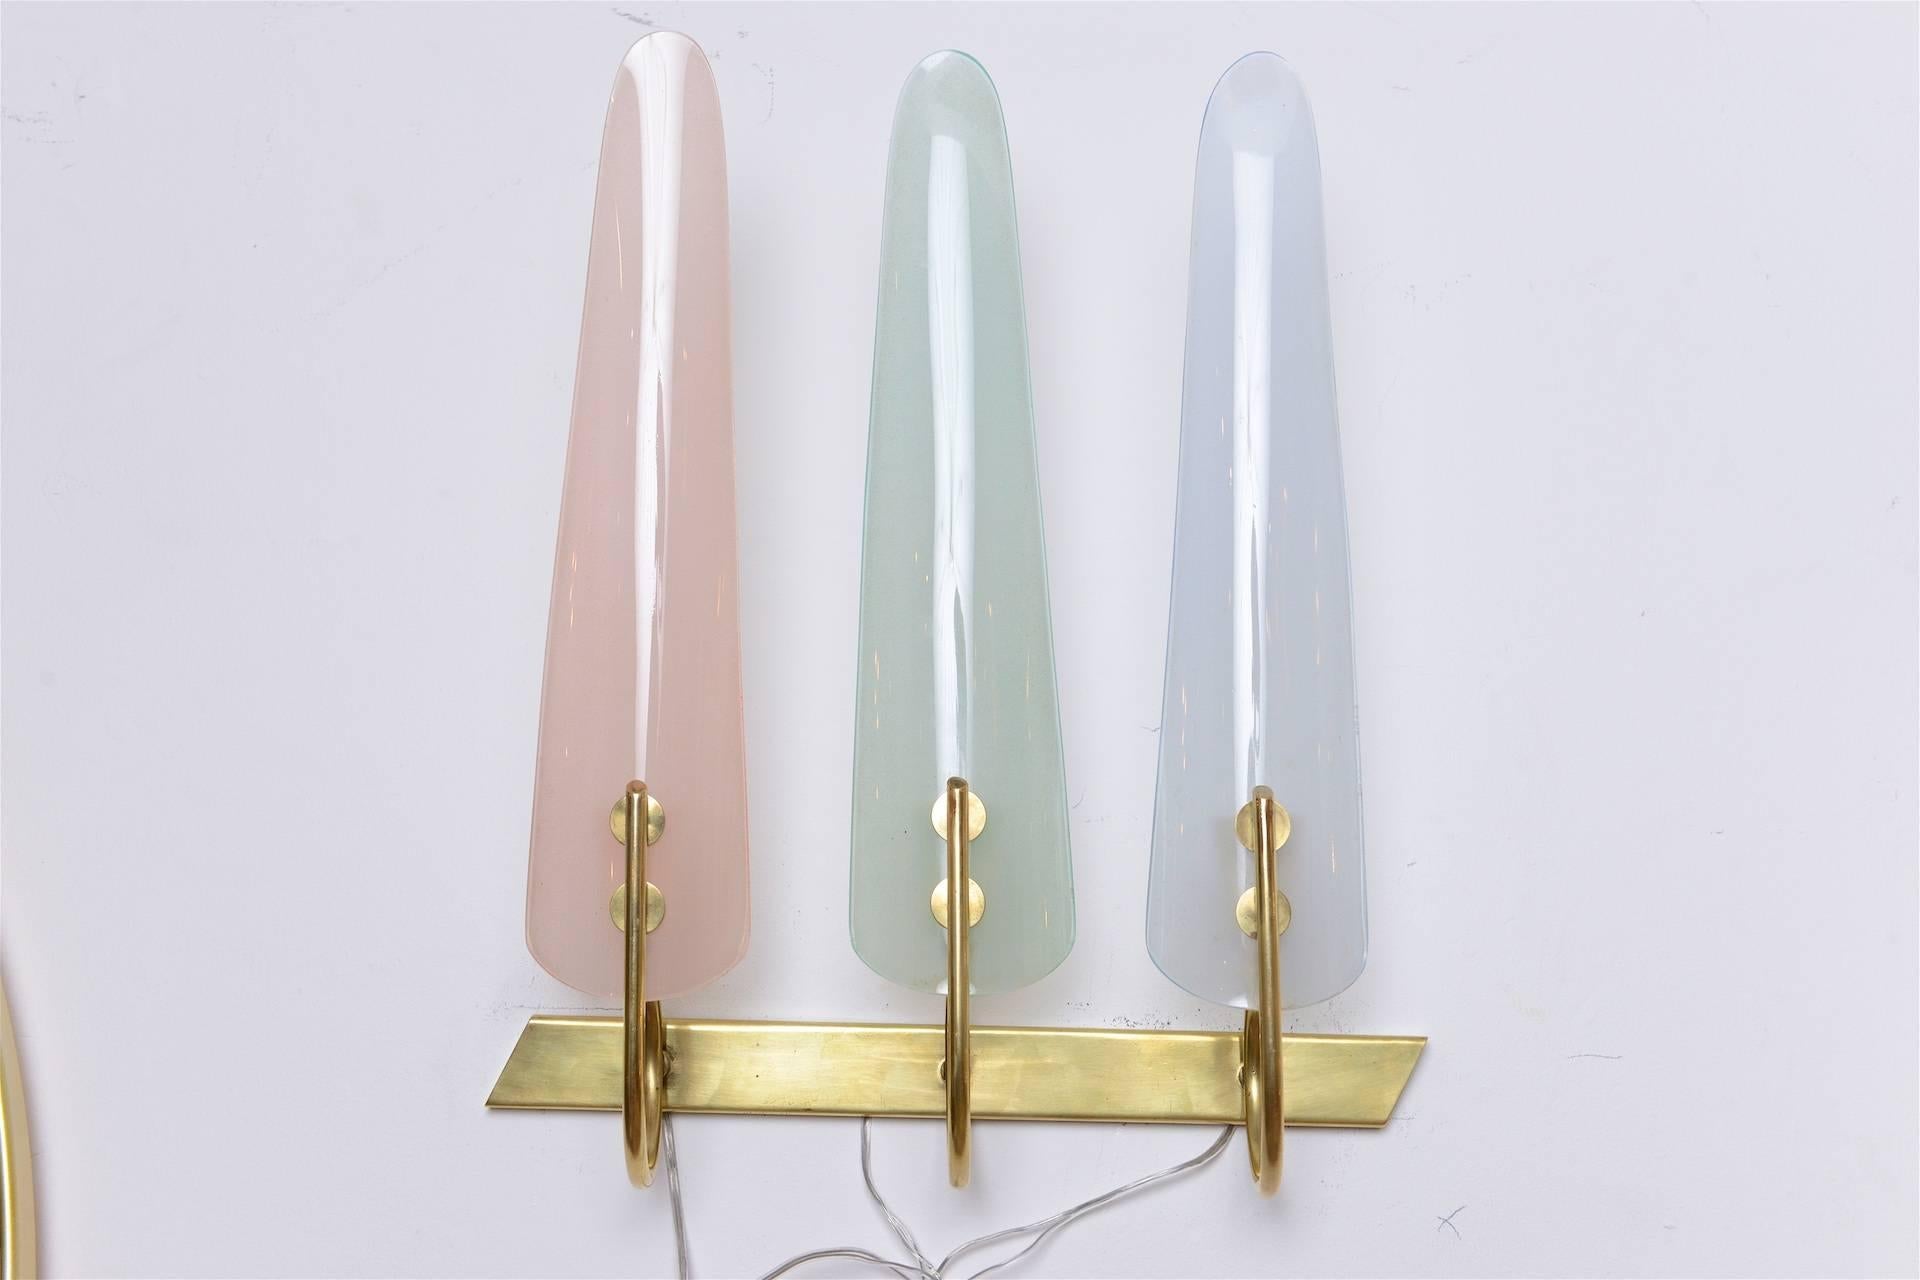 Similar in style to Dahlia wall lights by Max Ingrand for Fontana Arte

Pair of Italian wall lights. There are two other pairs of these lights with different color combinations. Can be used as a set of six lights

Pastel shades of salmon, green,